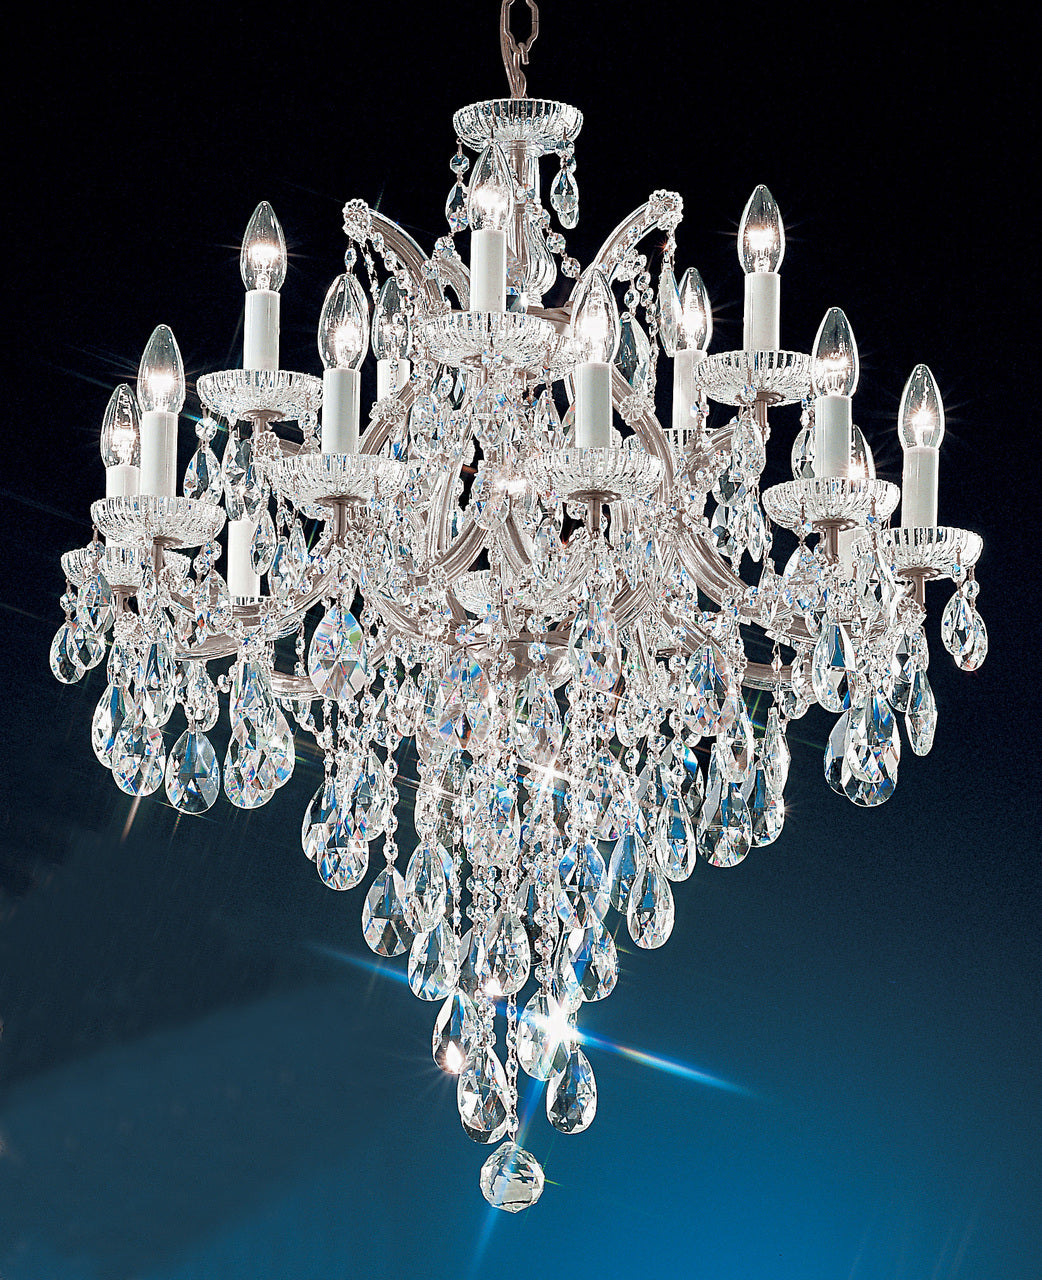 Classic Lighting 8126 CH C Maria Theresa Traditional Crystal Chandelier in Chrome (Imported from Italy)